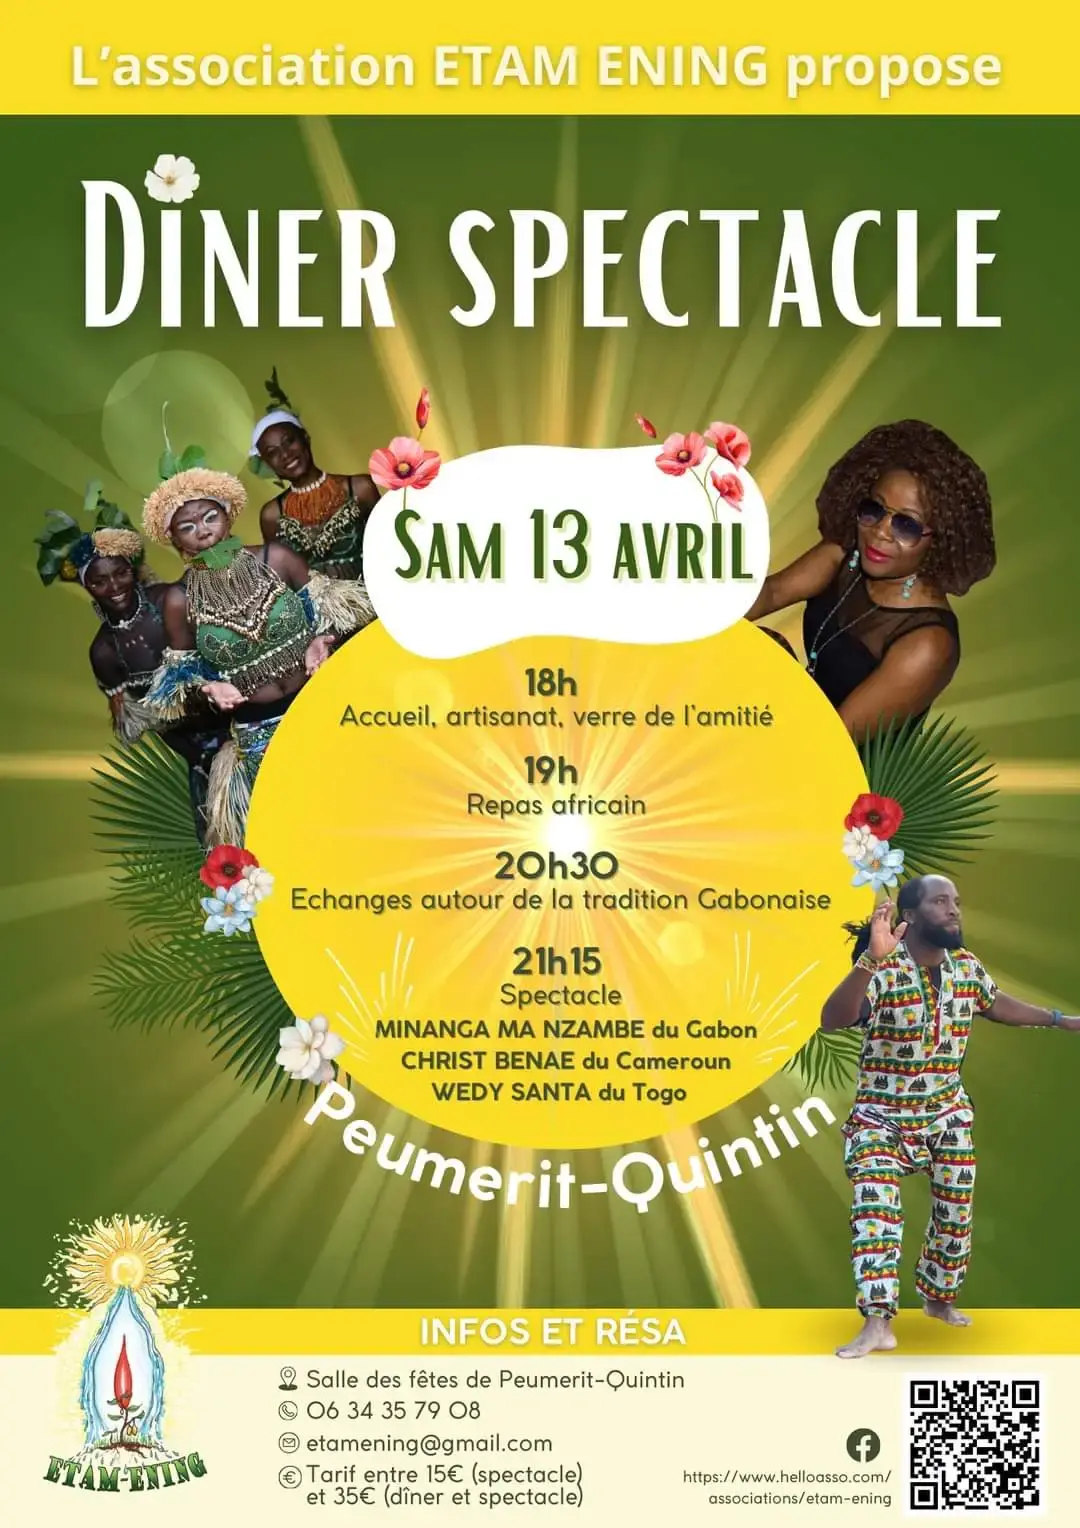 Diner spectacle